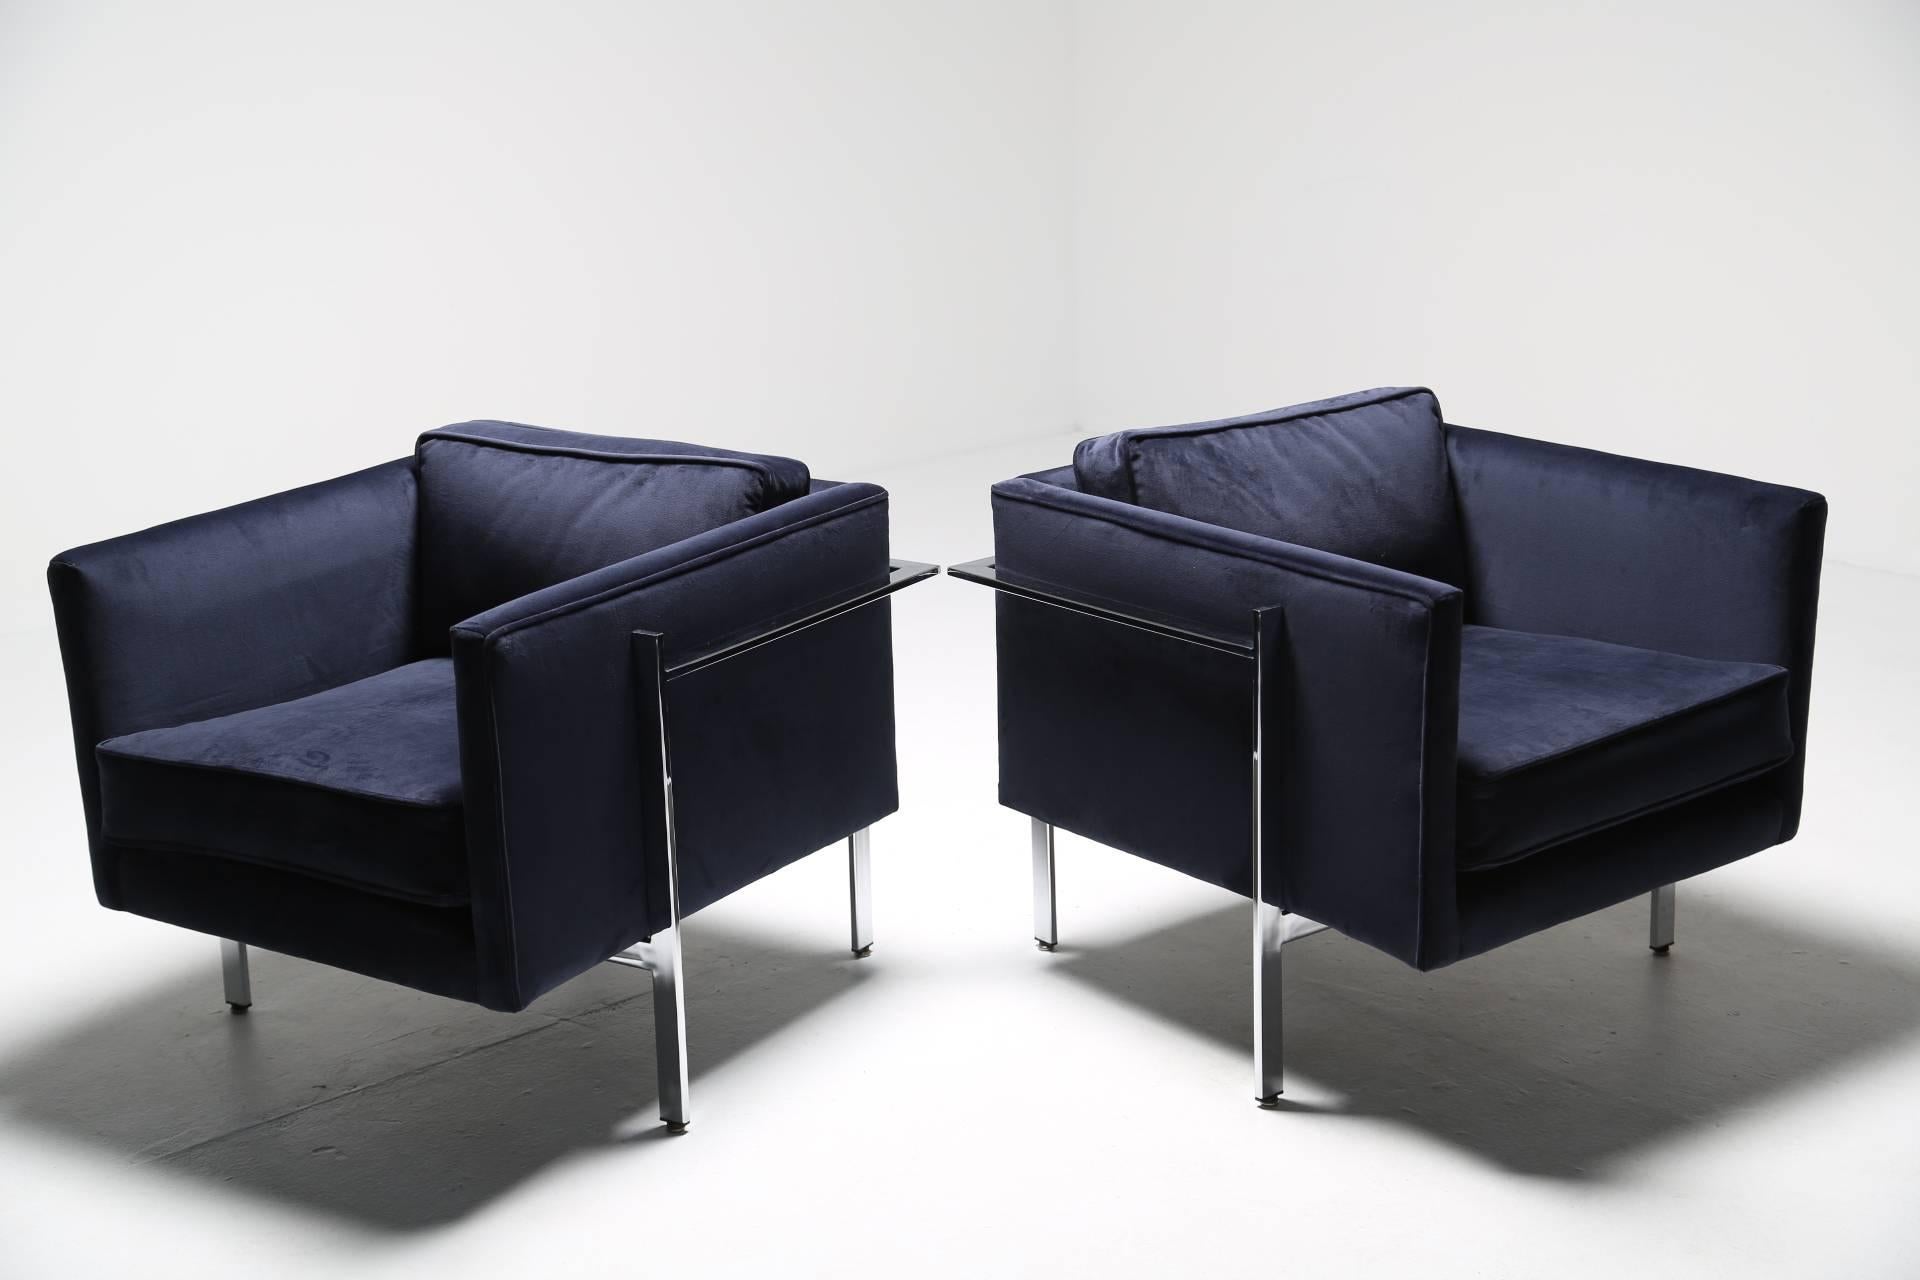 A pair of Mid-Century Modern lounge chairs by Milo Baughman for Thayer Coggin. Recently recovered in a navy blue velvet fabric. A nice comfortable deep pair of armchairs. Matching sofa is also available in a separate listing. Possibly two of the